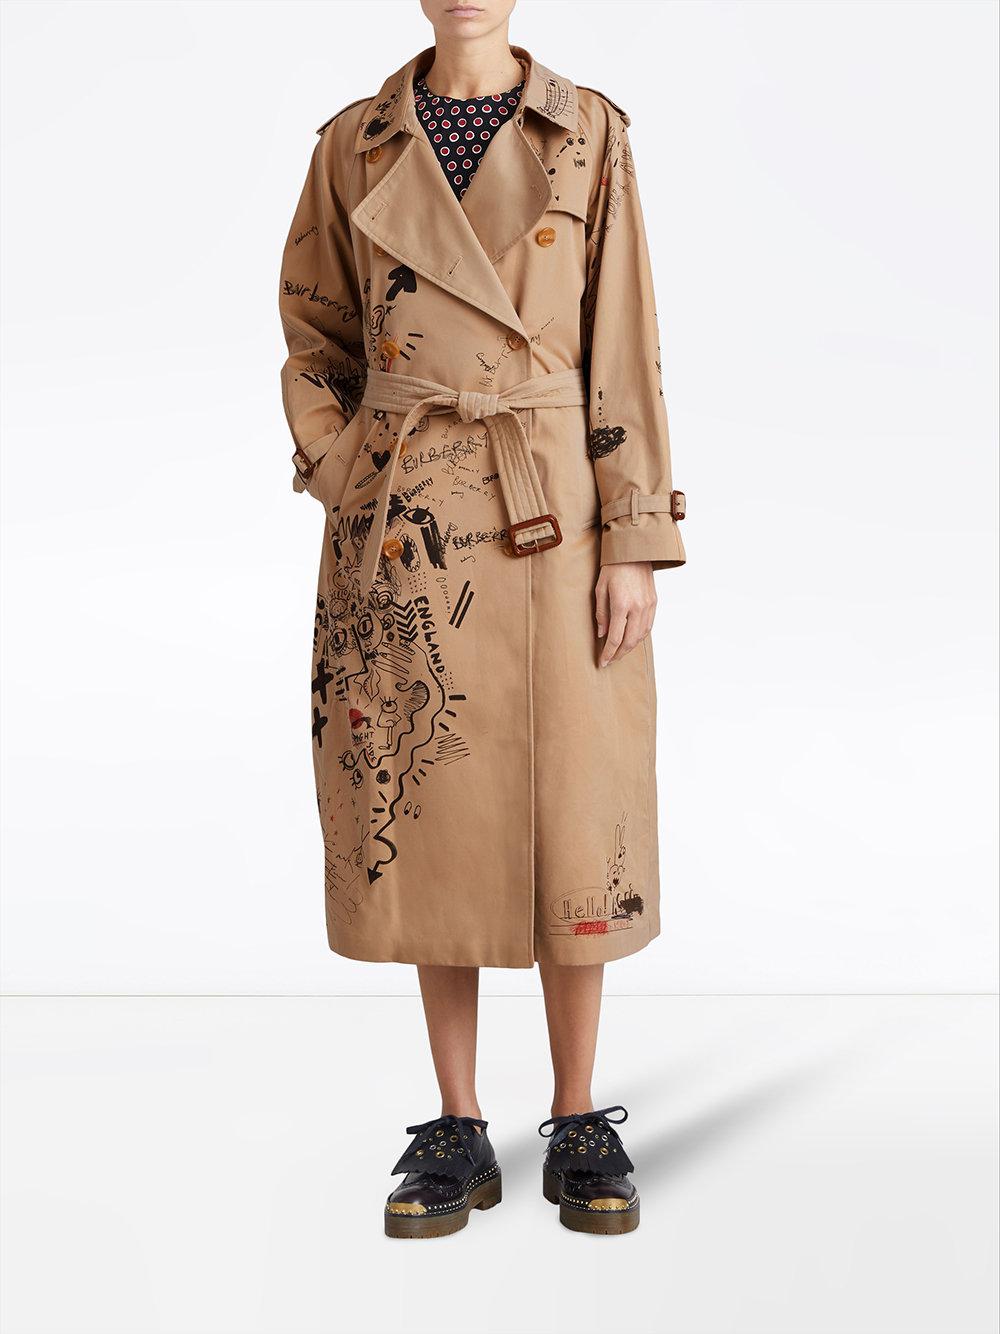 Burberry Cotton Sketch Print Trench Coat in Brown | Lyst Australia